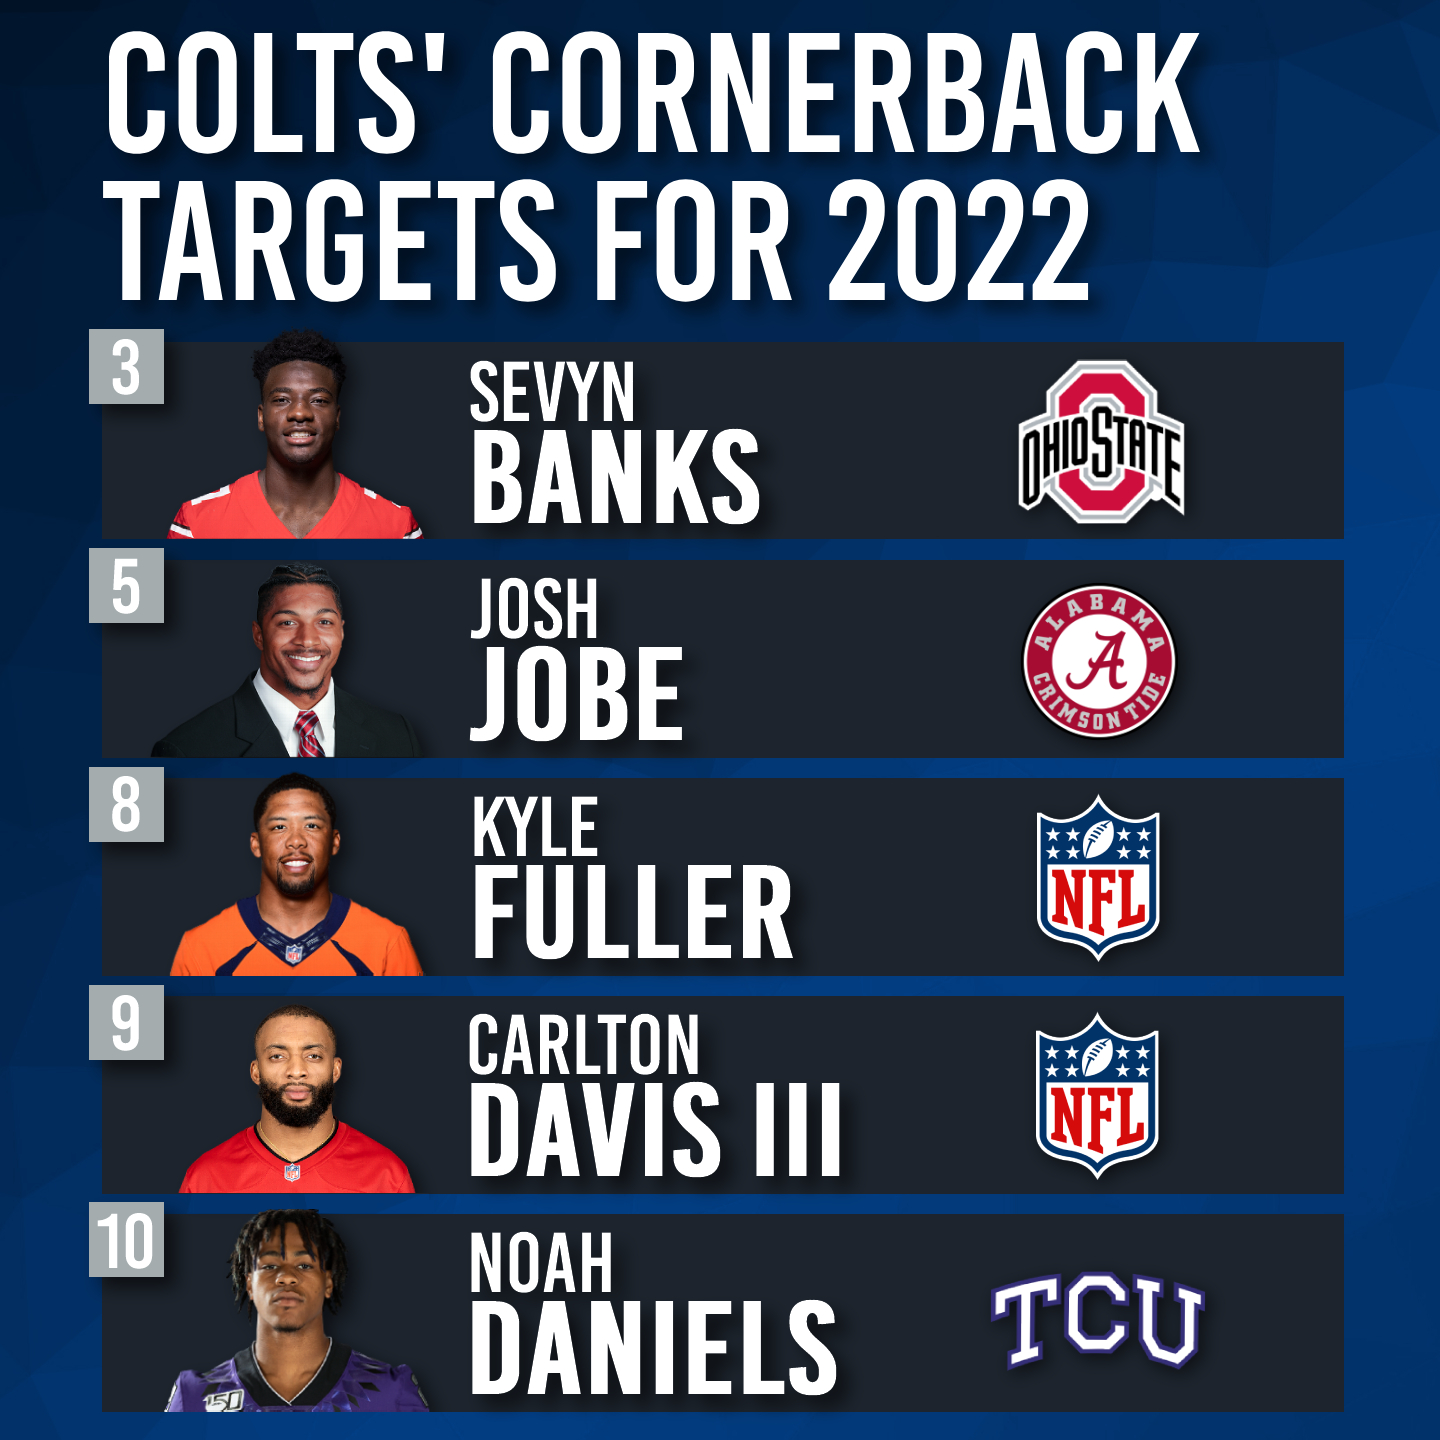 Top Colts’ Cornerback Targets for 2022